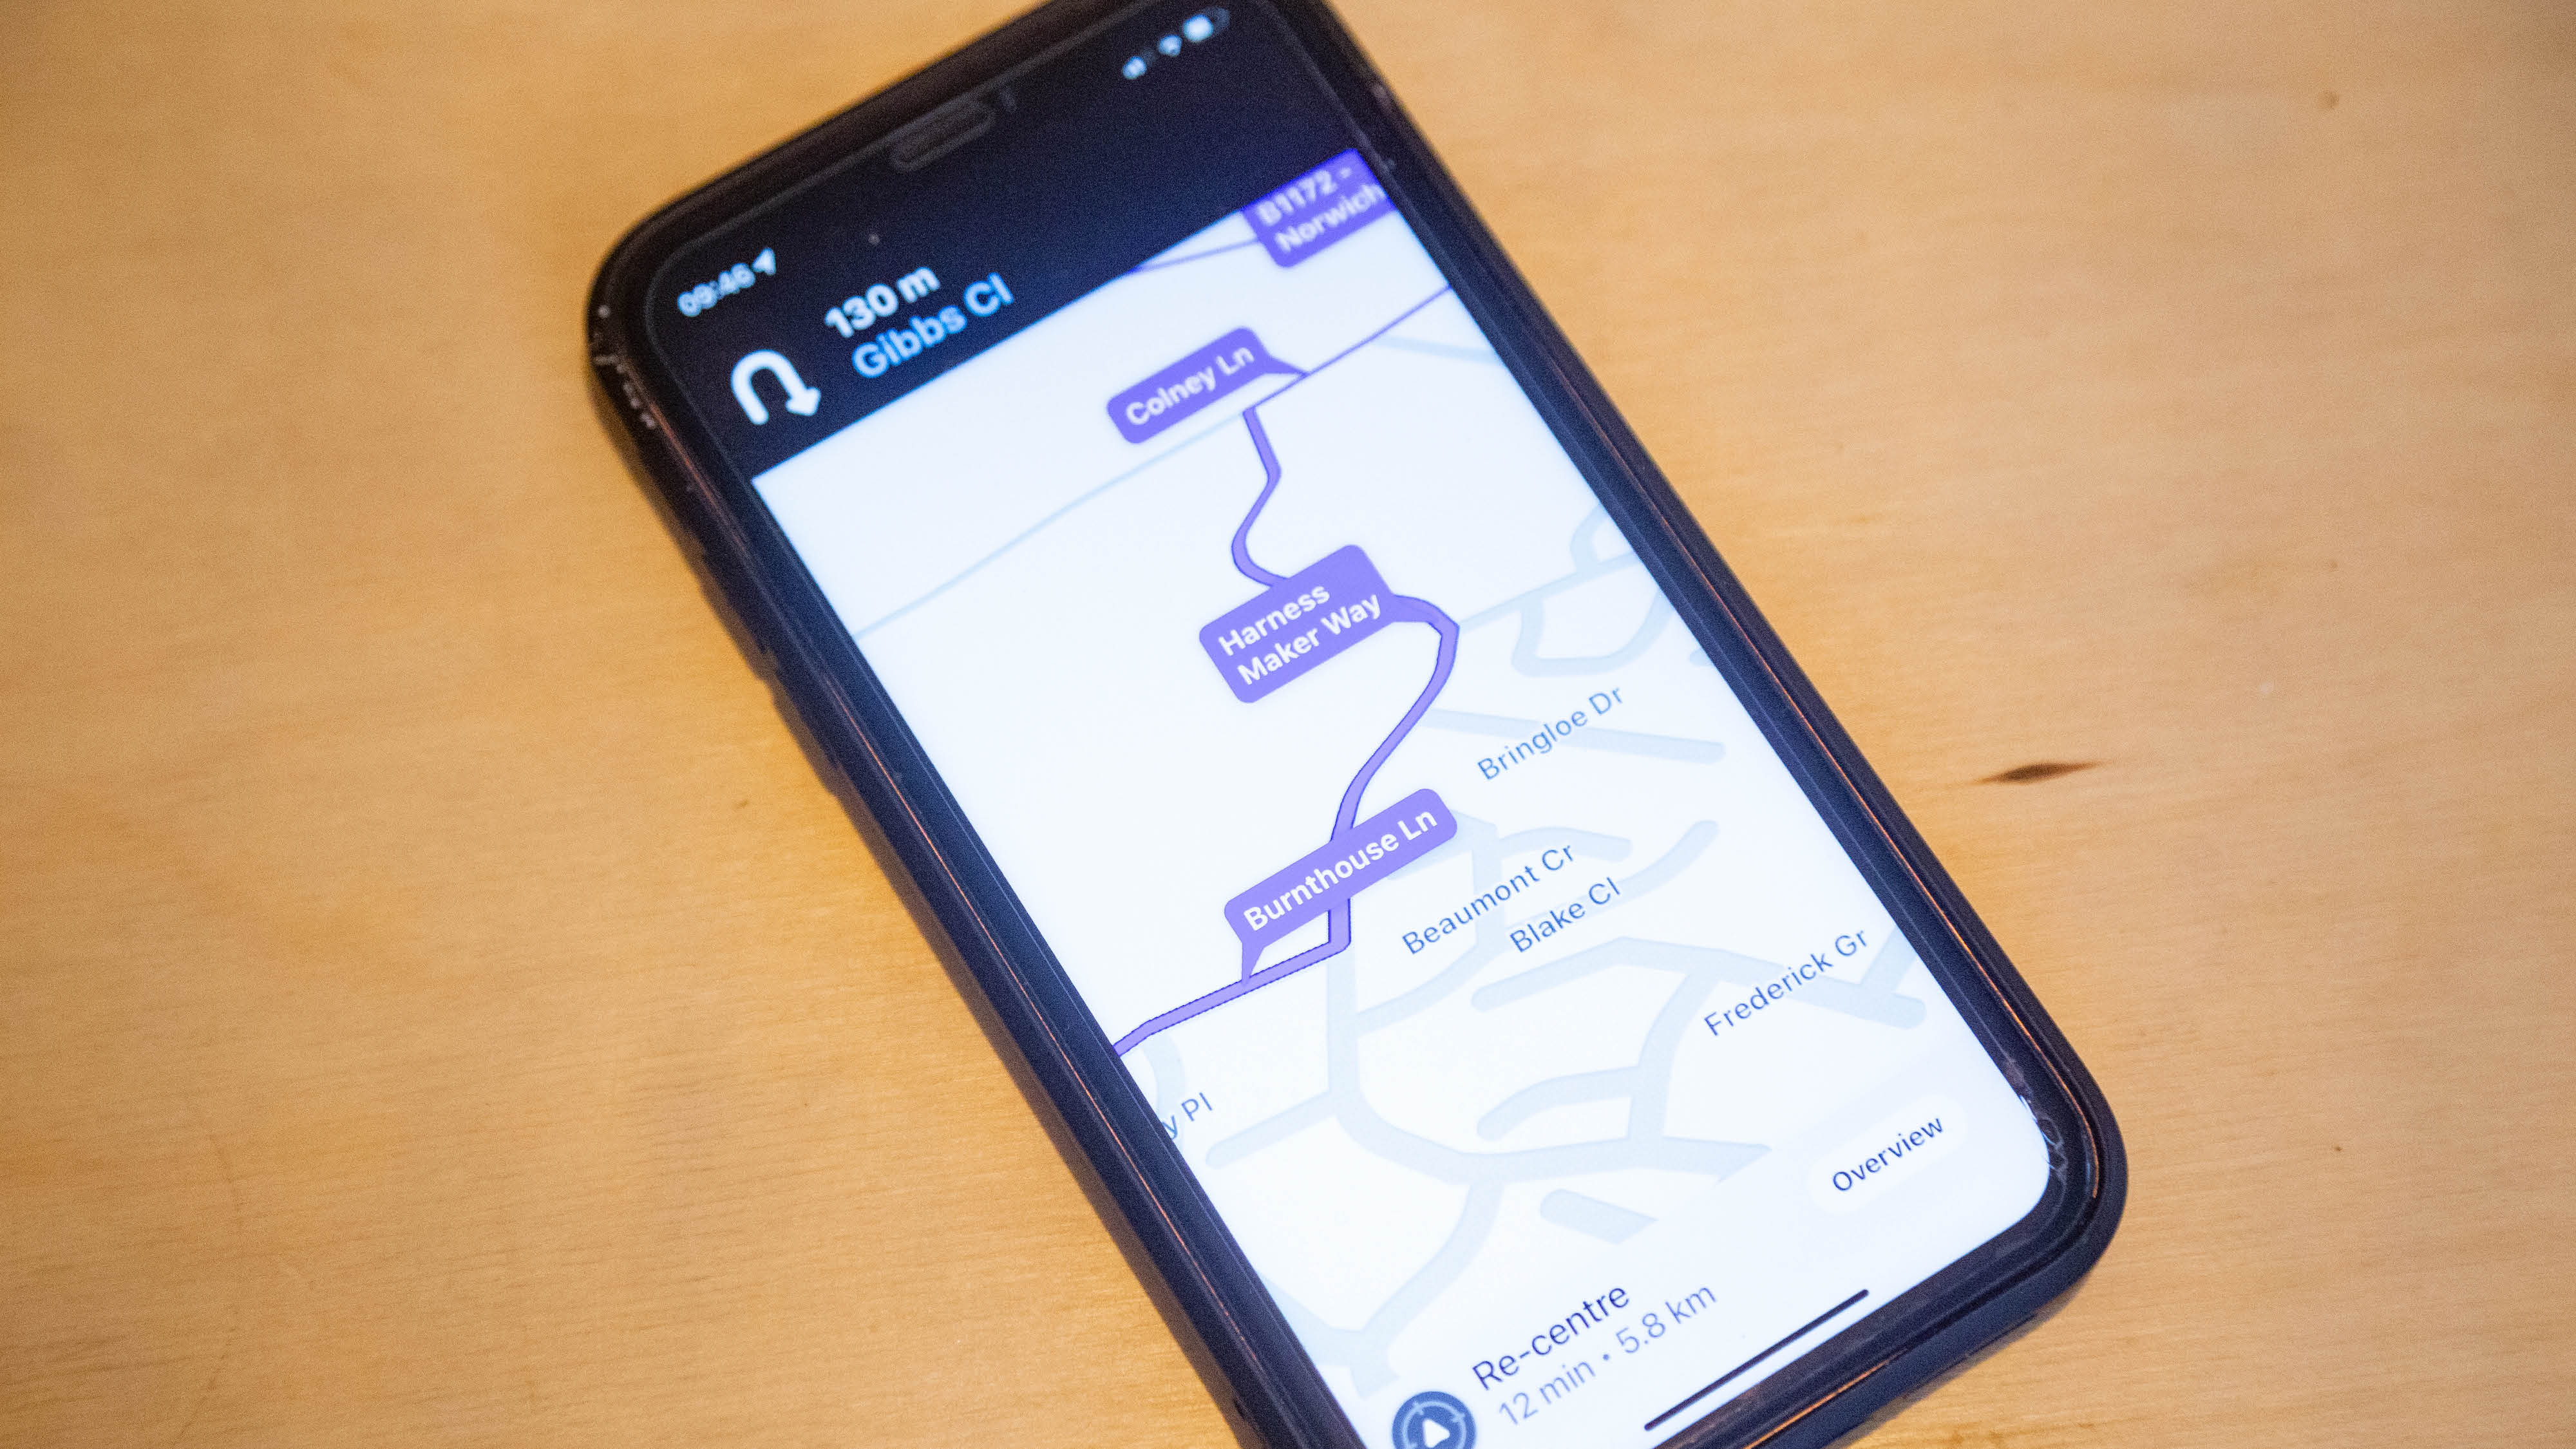 Waze constantly replans your route for quick journey times